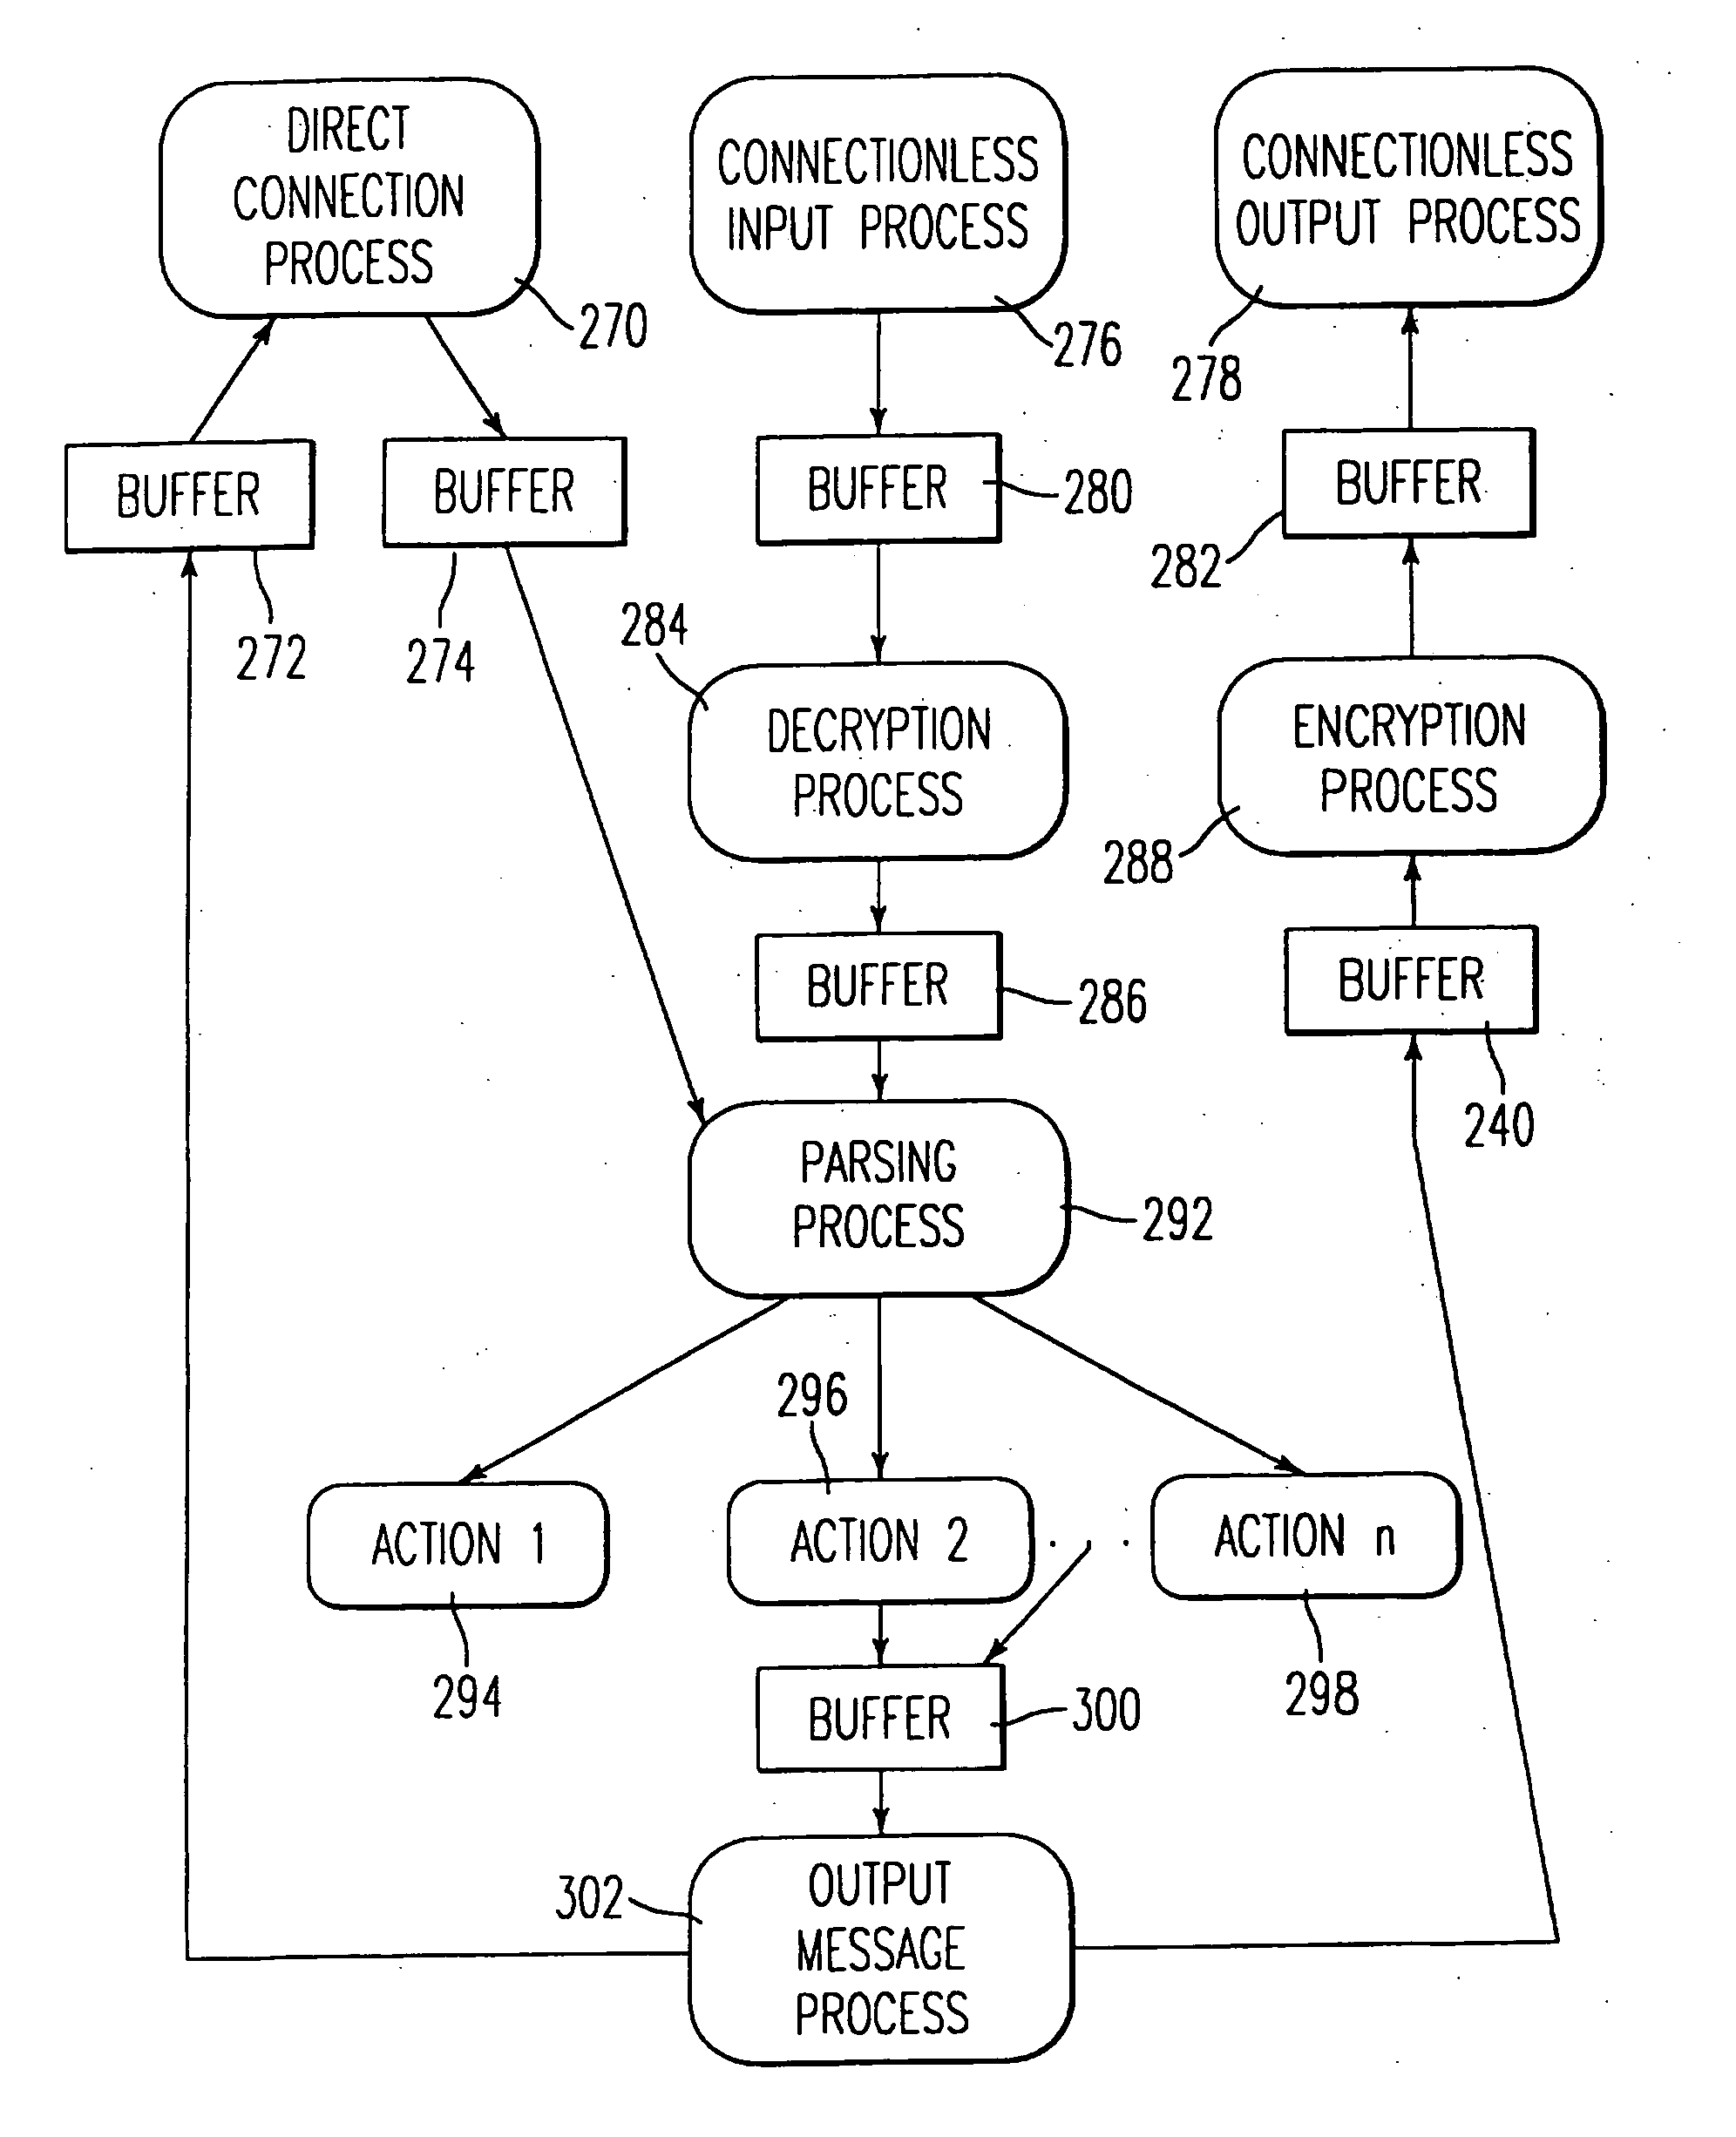 System uses internet electronic mail for requesting status of a monitored device from a monitoring device